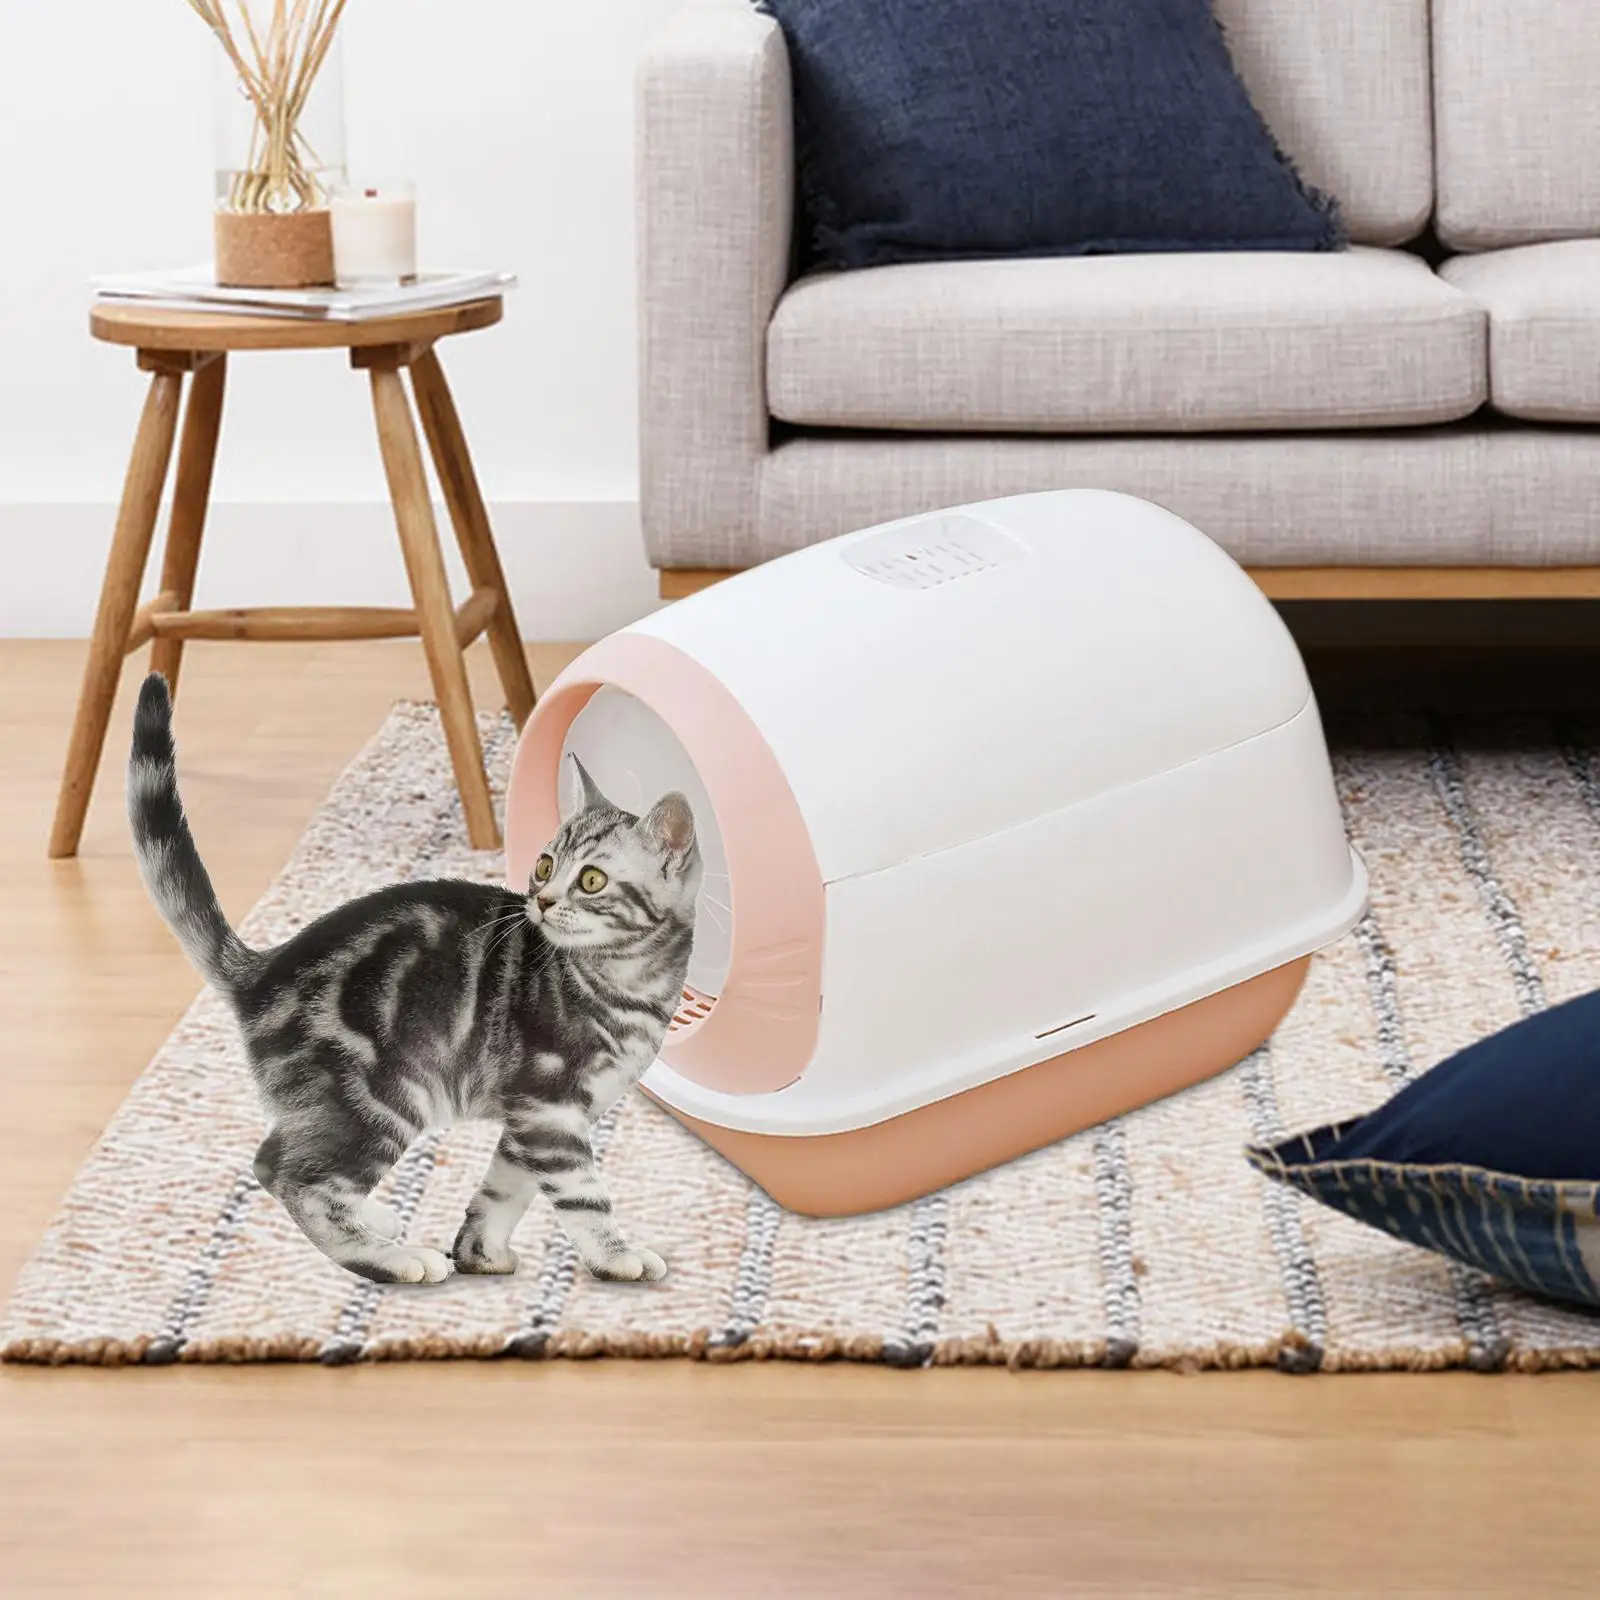 Hooded Cat Litter Box Enclosed Potty Toilet Spoon Bunny Pet Litter Tray